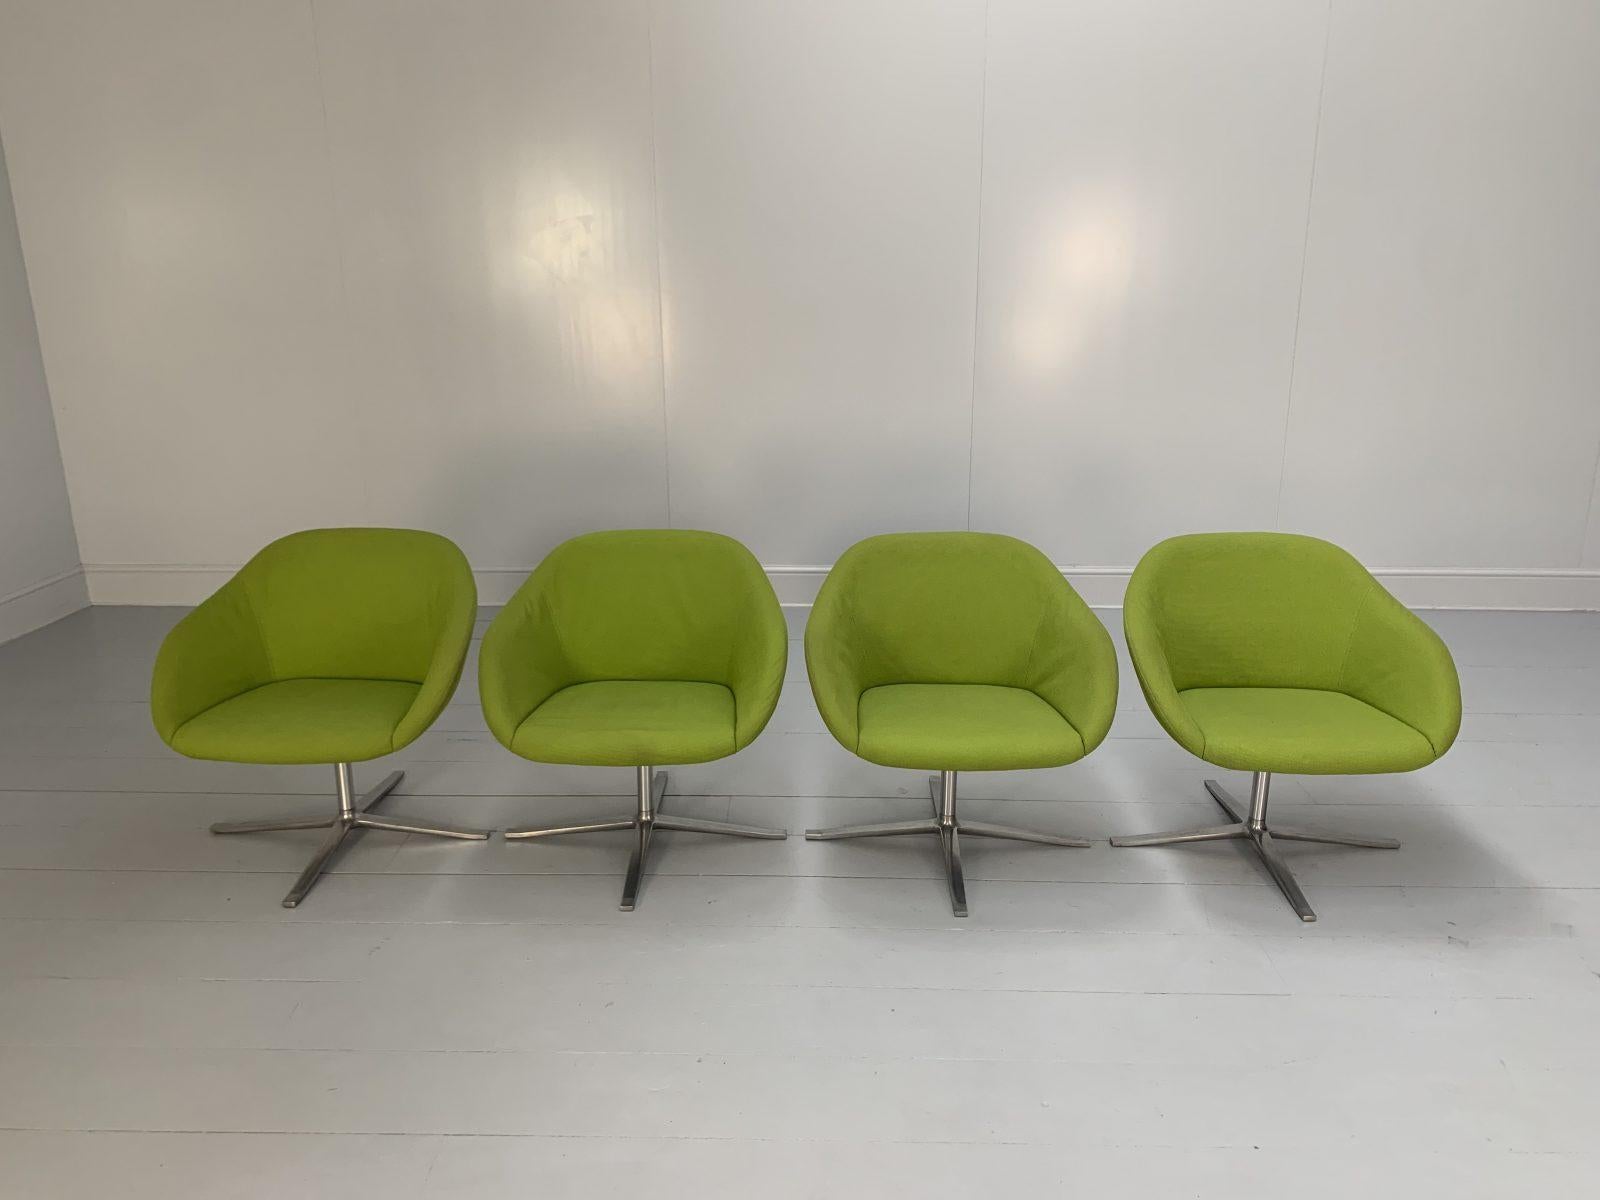 Hello Friends, and welcome to another unmissable offering from Lord Browns Furniture, the UK’s premier resource for fine Sofas and Chairs.

On offer on this occasion is a rare suite of 4 identical “Turtle” Armchairs, from the world renown German